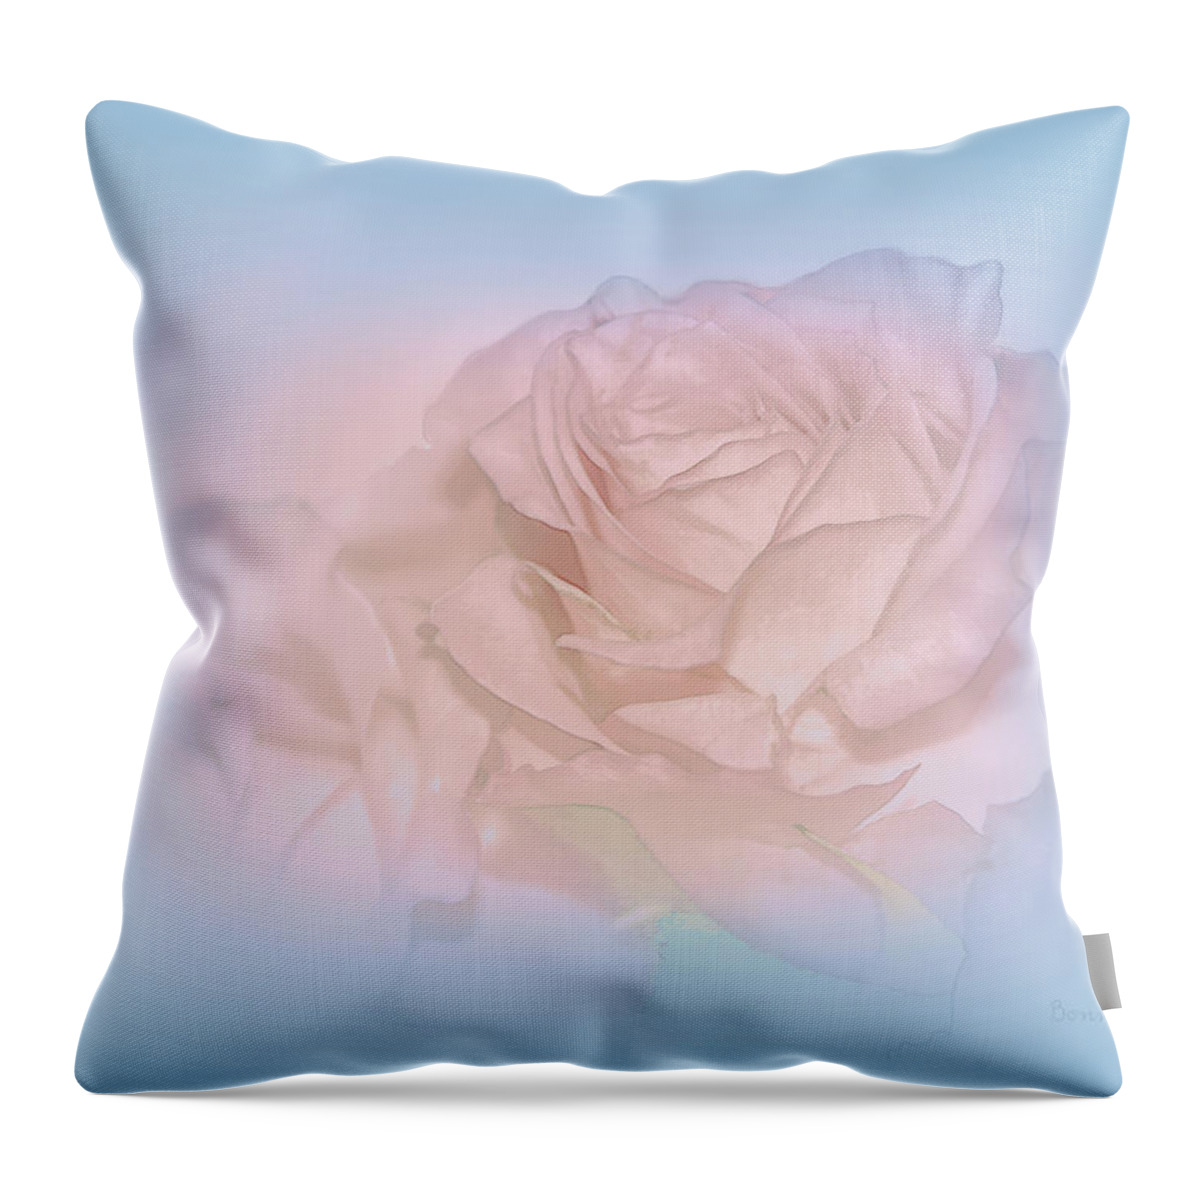 Rose Throw Pillow featuring the photograph Sweet Fragrance by Bonnie Willis